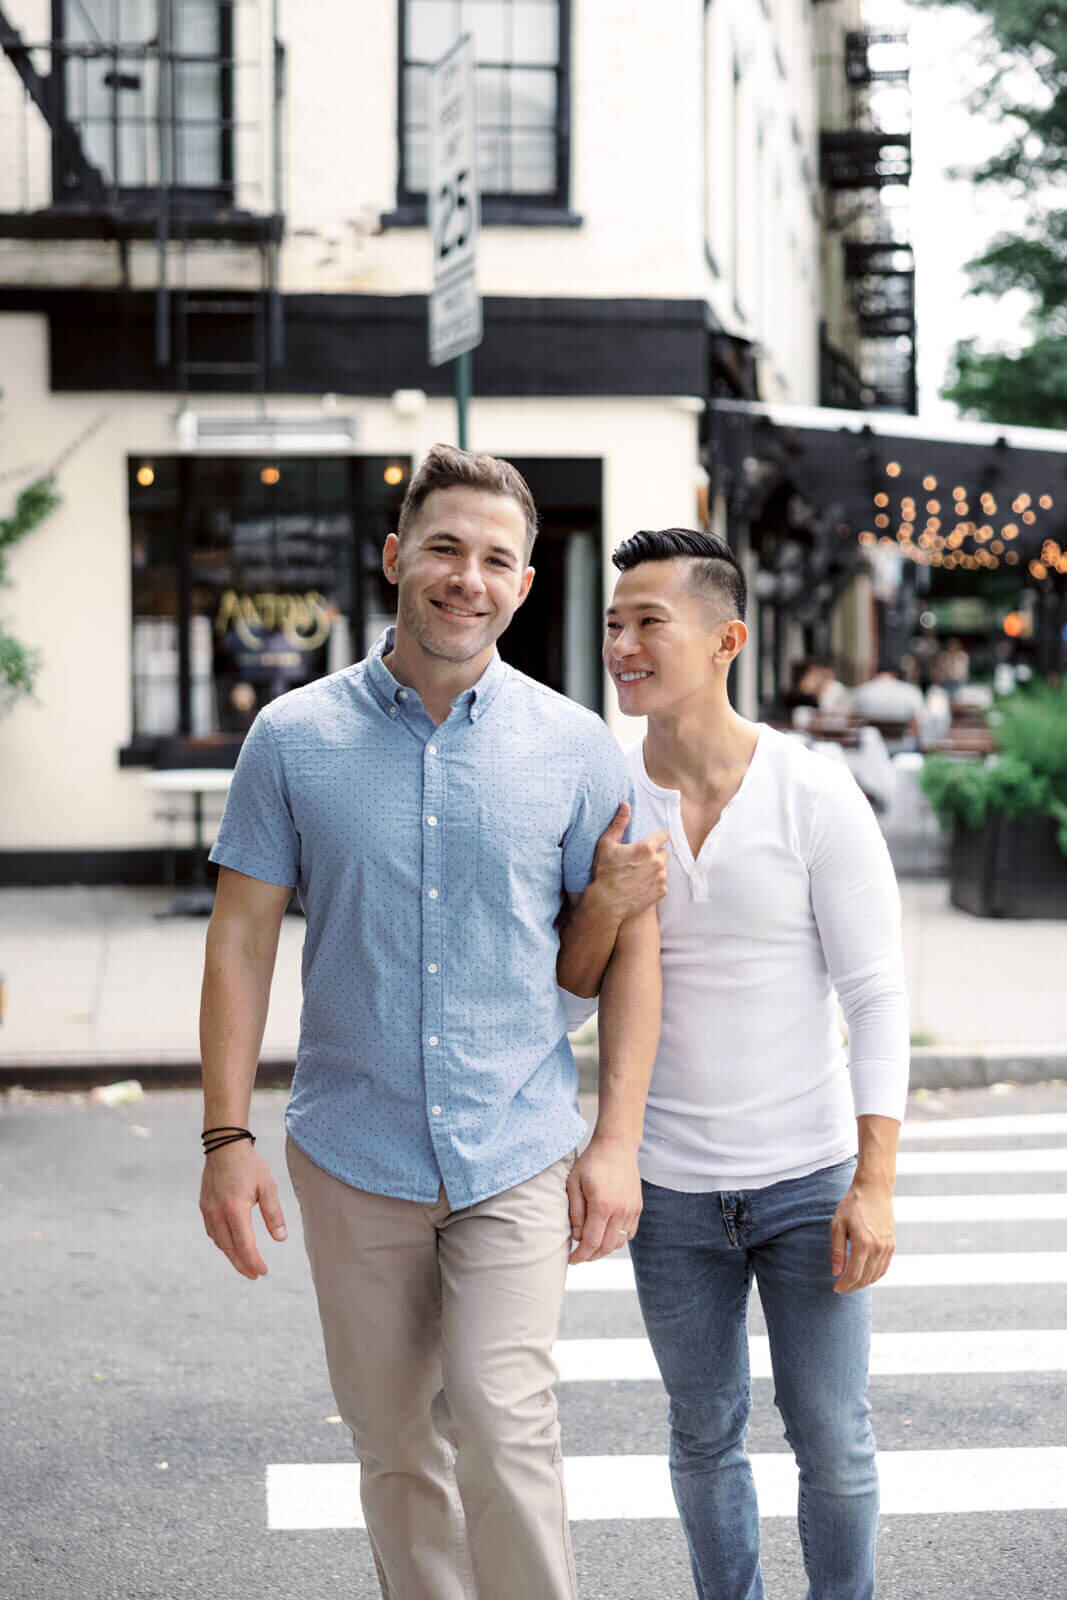 The engaged man is clinging to his fiancé's arm while crossing the street in West Village, NYC. Image by Jenny Fu Studio